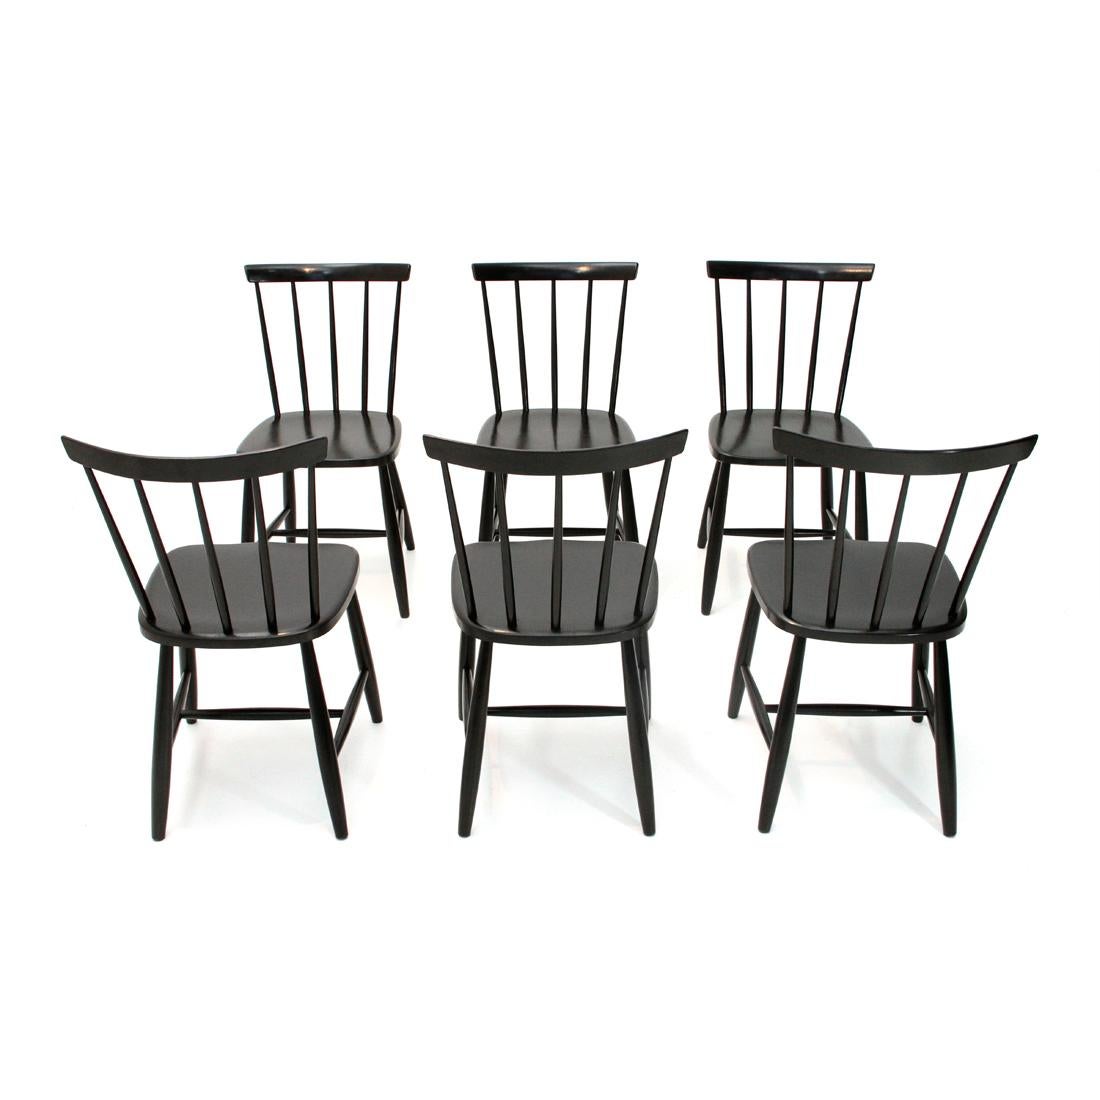 Lot of six Swedish manufacturing chairs produced in the 1960s and imported from Casa Arredo in Milan.
Solid wood frame, black stained.
Good general conditions, some signs due to normal use over time, some woodworm holes closed and